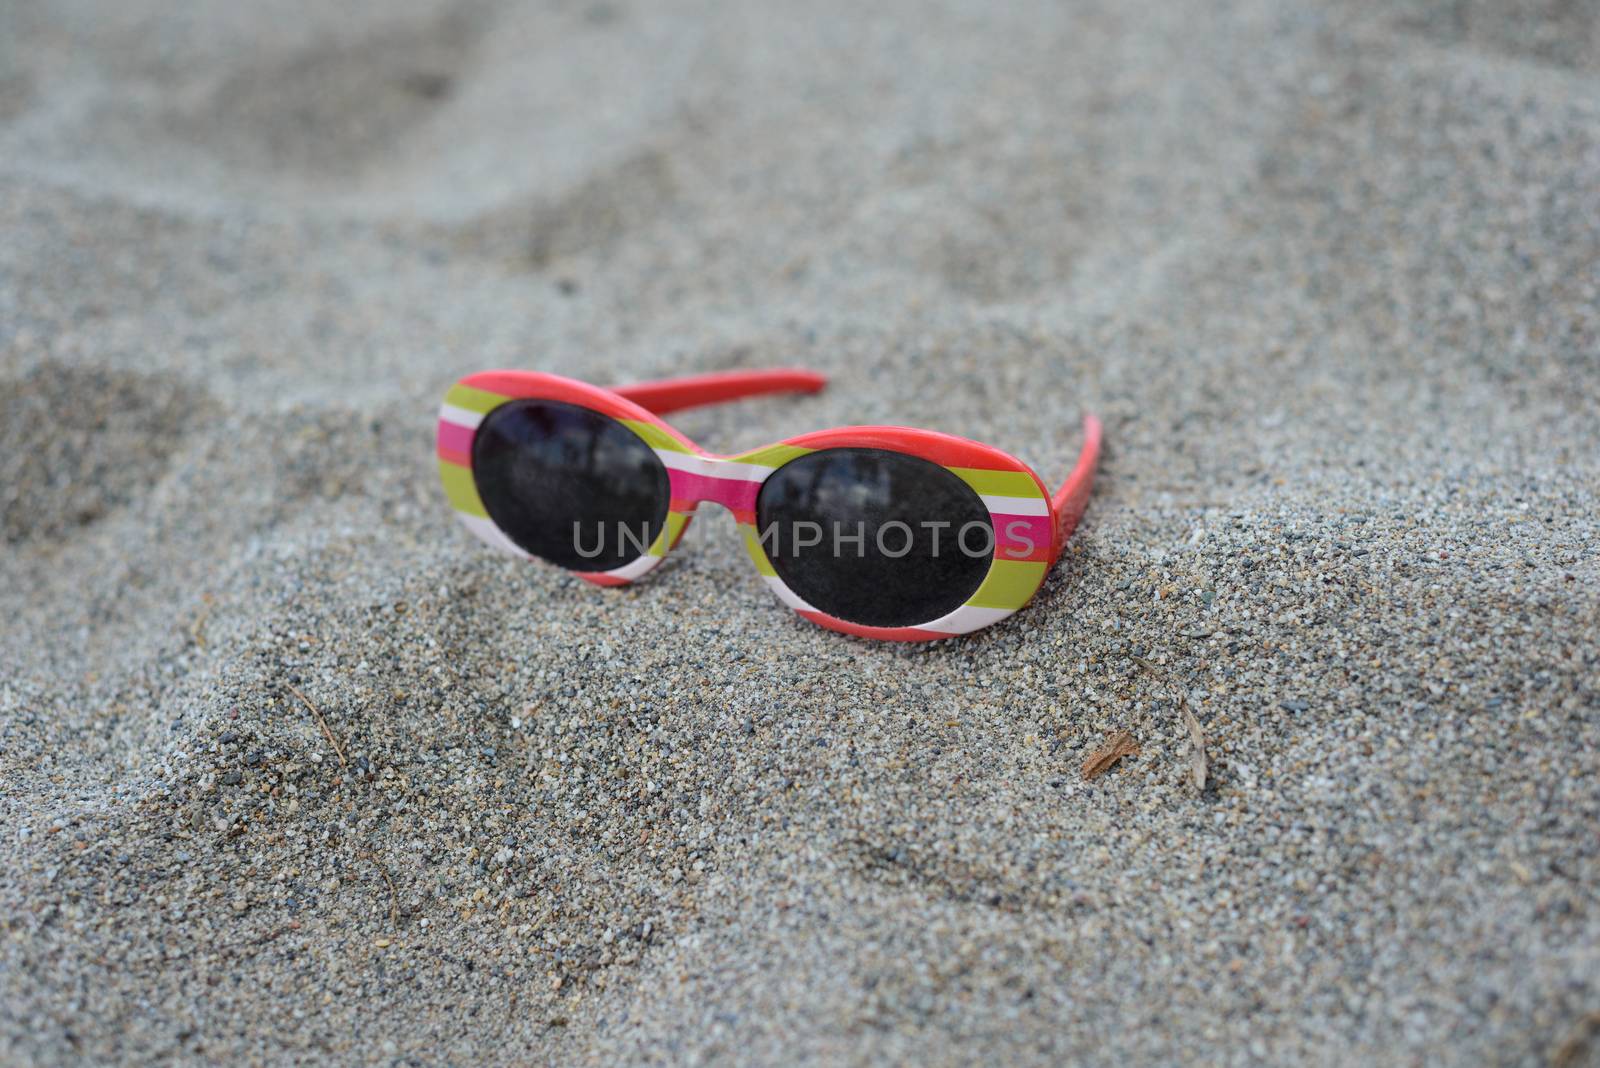 Used children's striped sunglasses lying on the sand